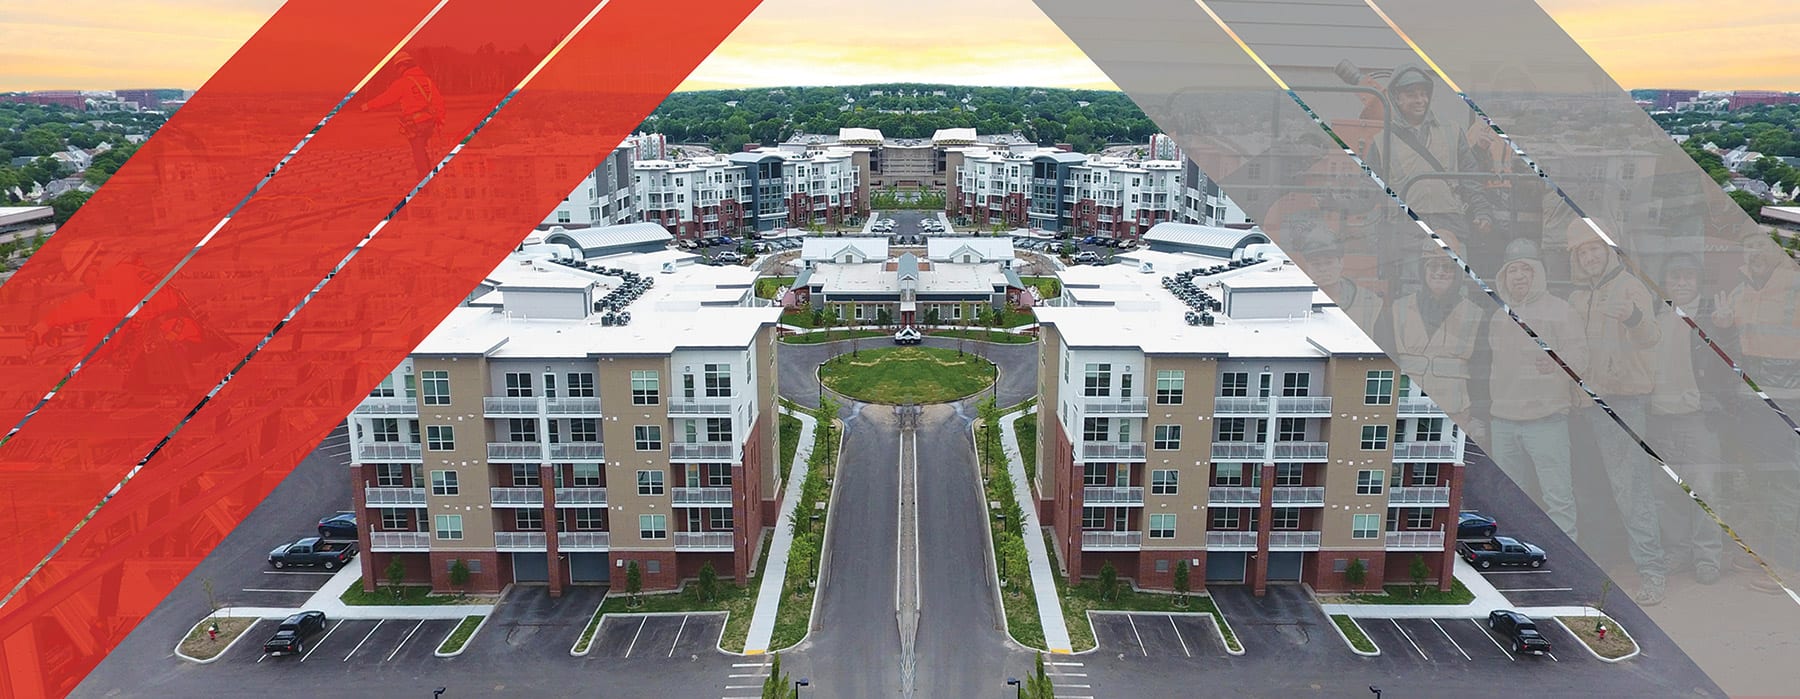 Aerial view of apartment complex with red and gray angled lines